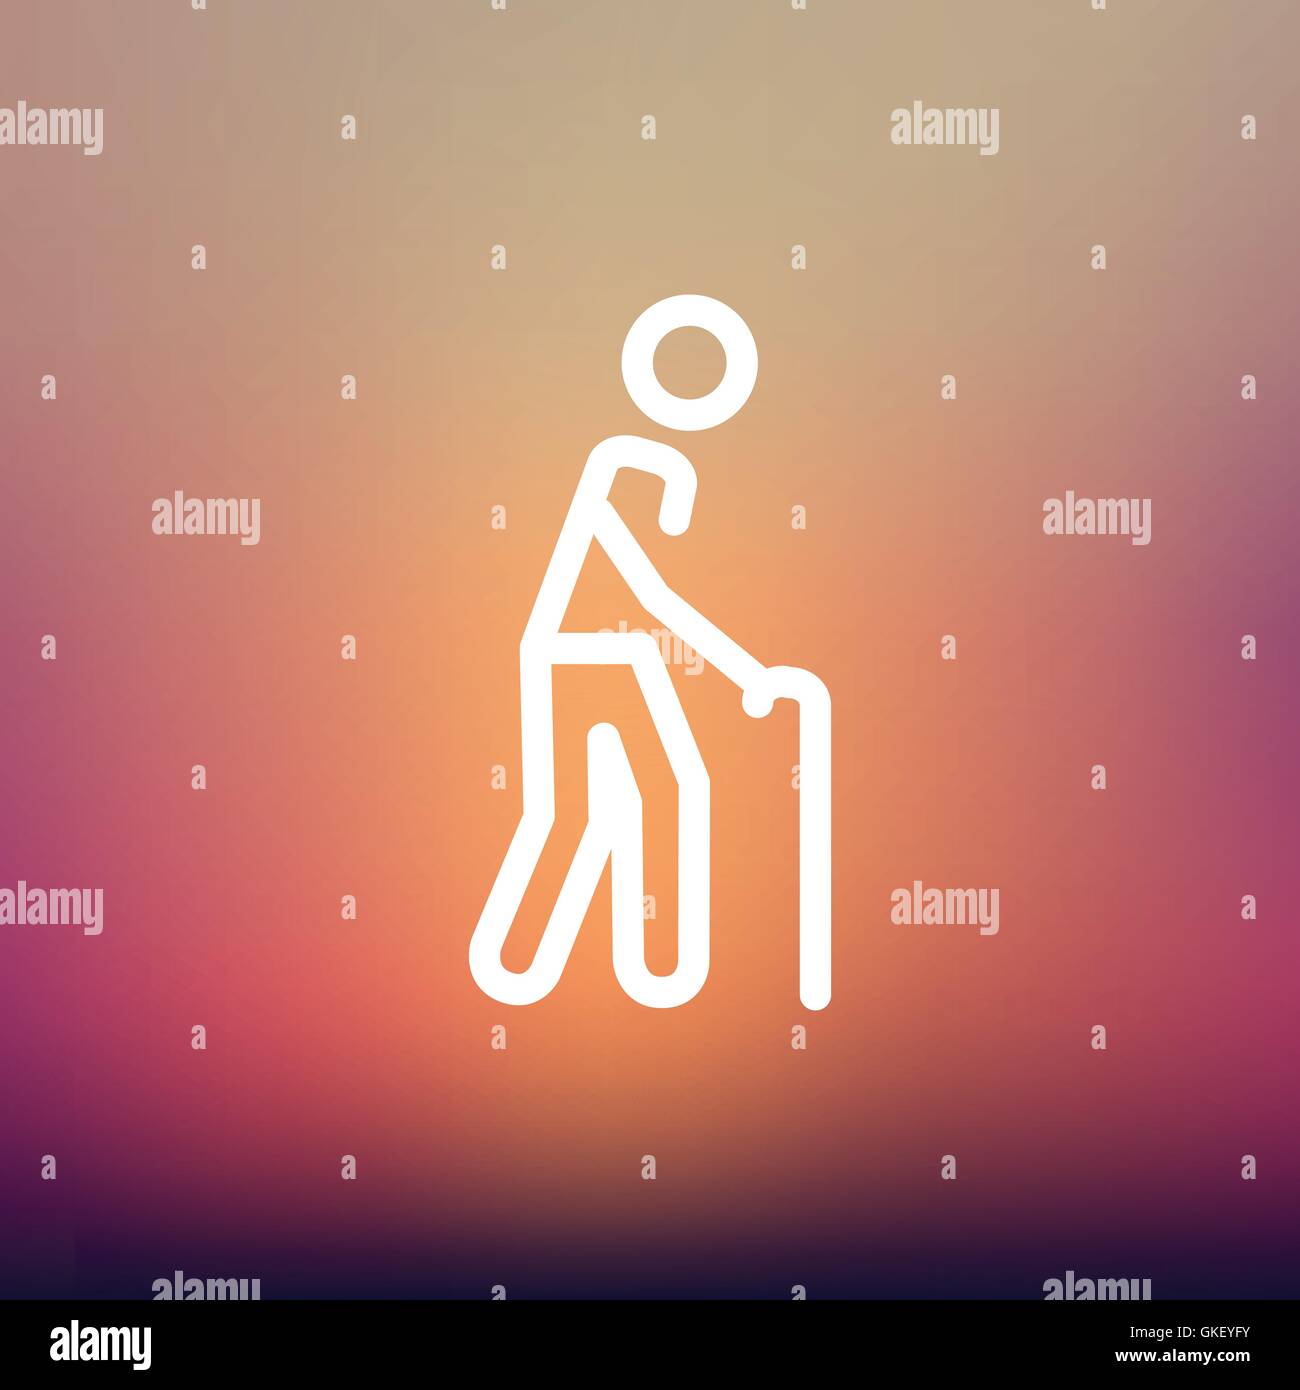 Man with Cane thin line icon Stock Vector